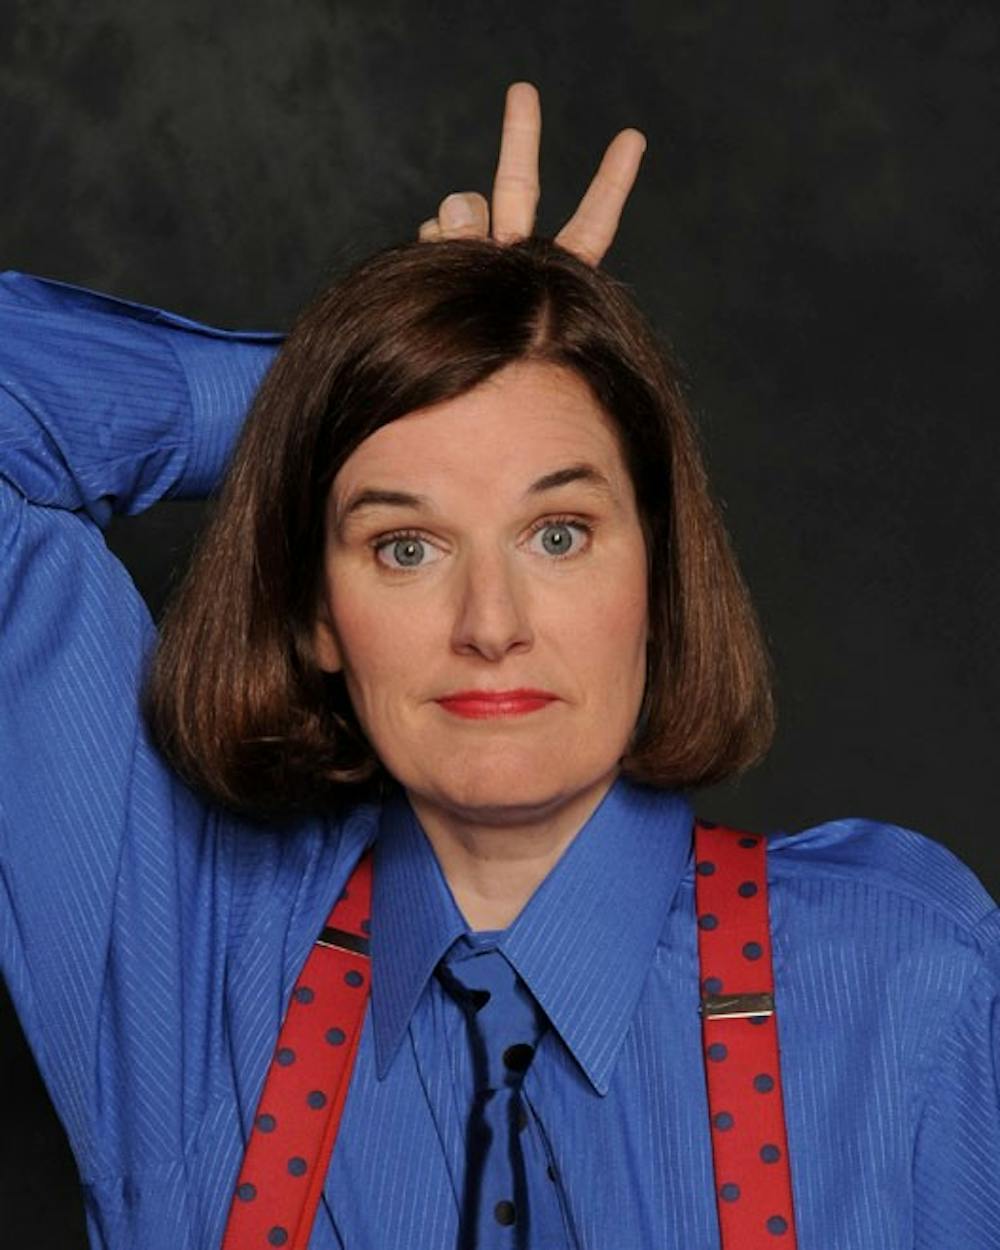 CLOWN ACT â€” Paula Poundstone will be bringing her one-woman act to the Berchmere on Oct. 3. Poundstone just released her first comedy CD, â€œI Heart Jokes: Paula Tells Them in Maine.â€ She was the first woman to win the ACE award for Best Standup Comedy Performance.